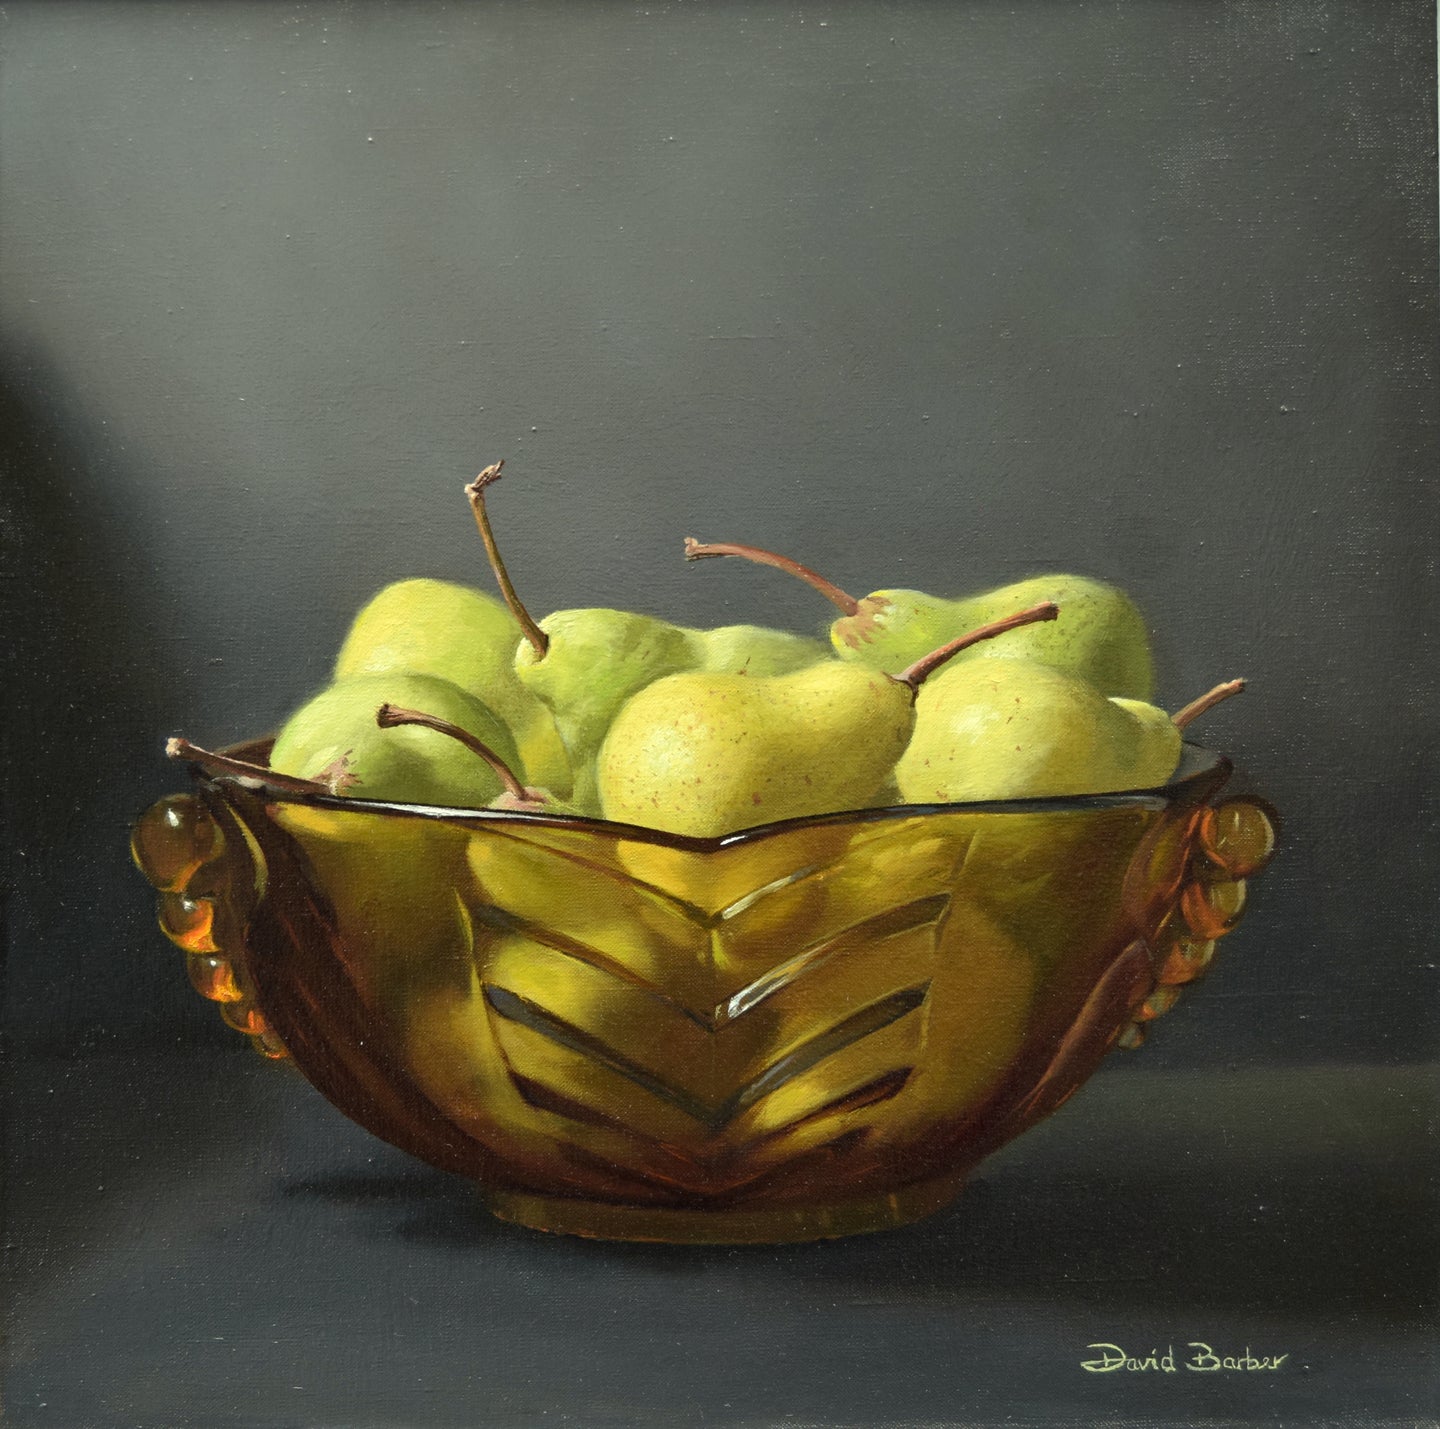 16 x 16 inch Oil on Linen Canvas, of a rust-hued glass bowl of pears, light cource from the upper left, with a dark background. Classically painted, very realistic.